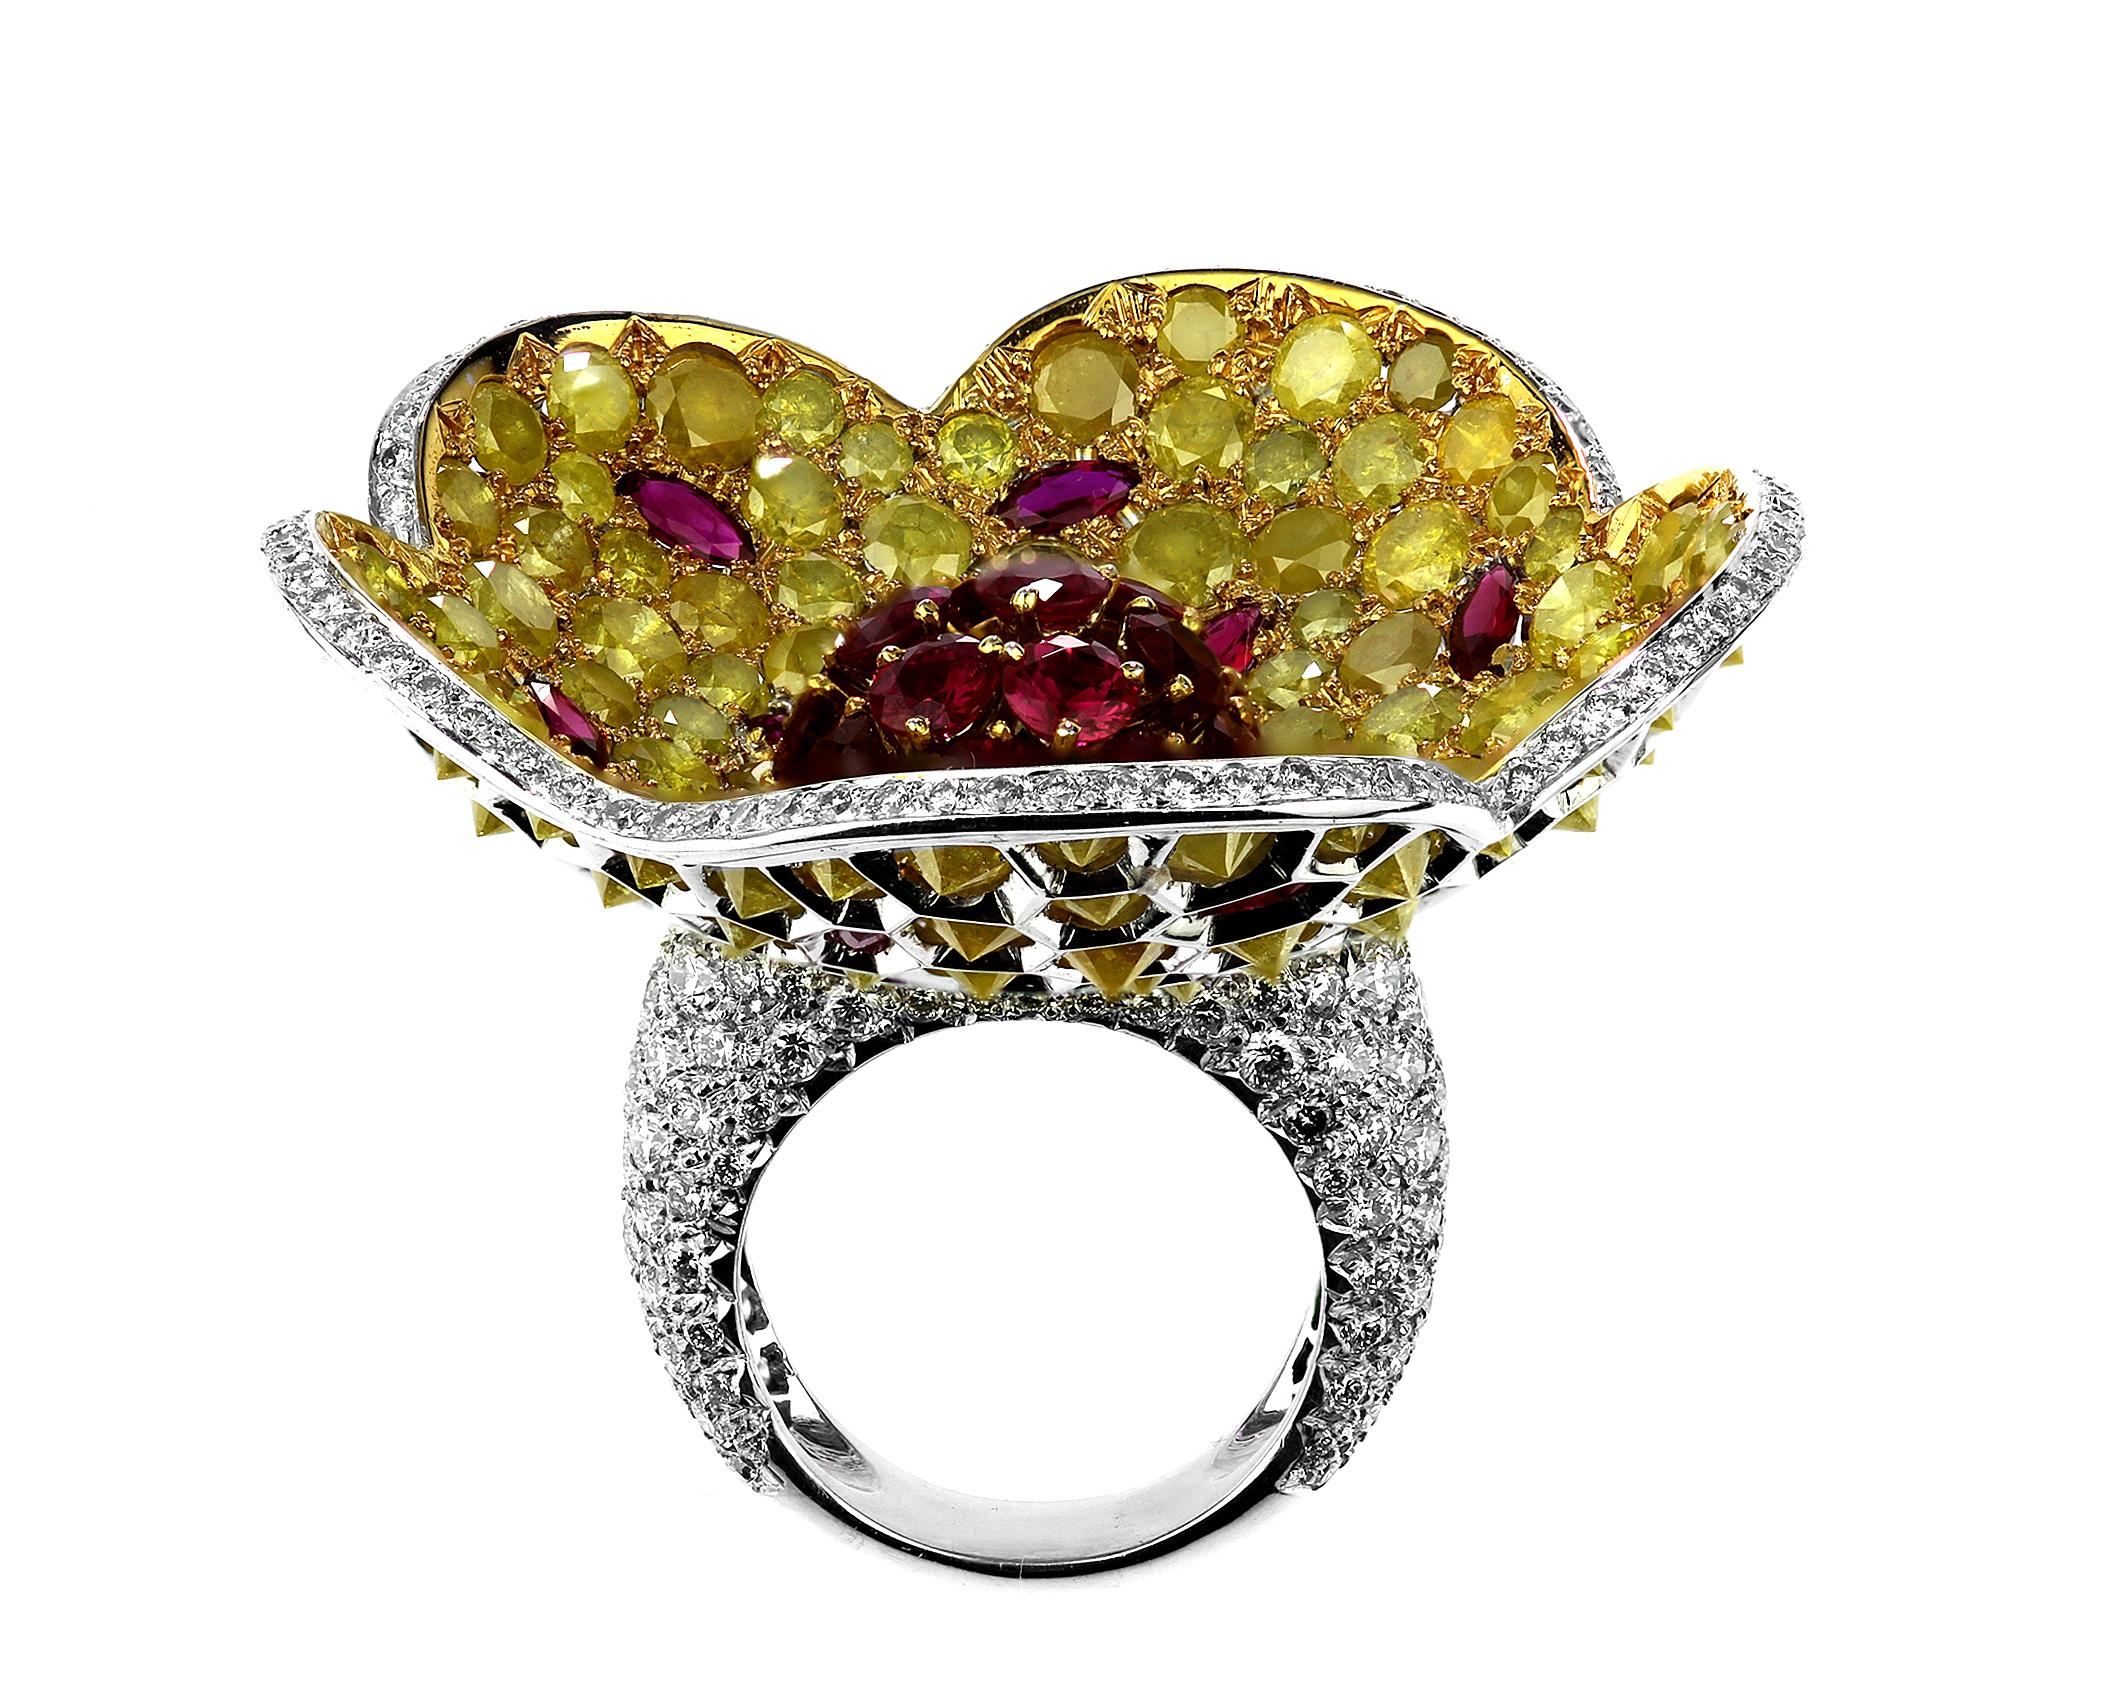 Women's Designer De Grisogono Big Floral Cocktail Ring with Ruby, Yellow & White Diamond